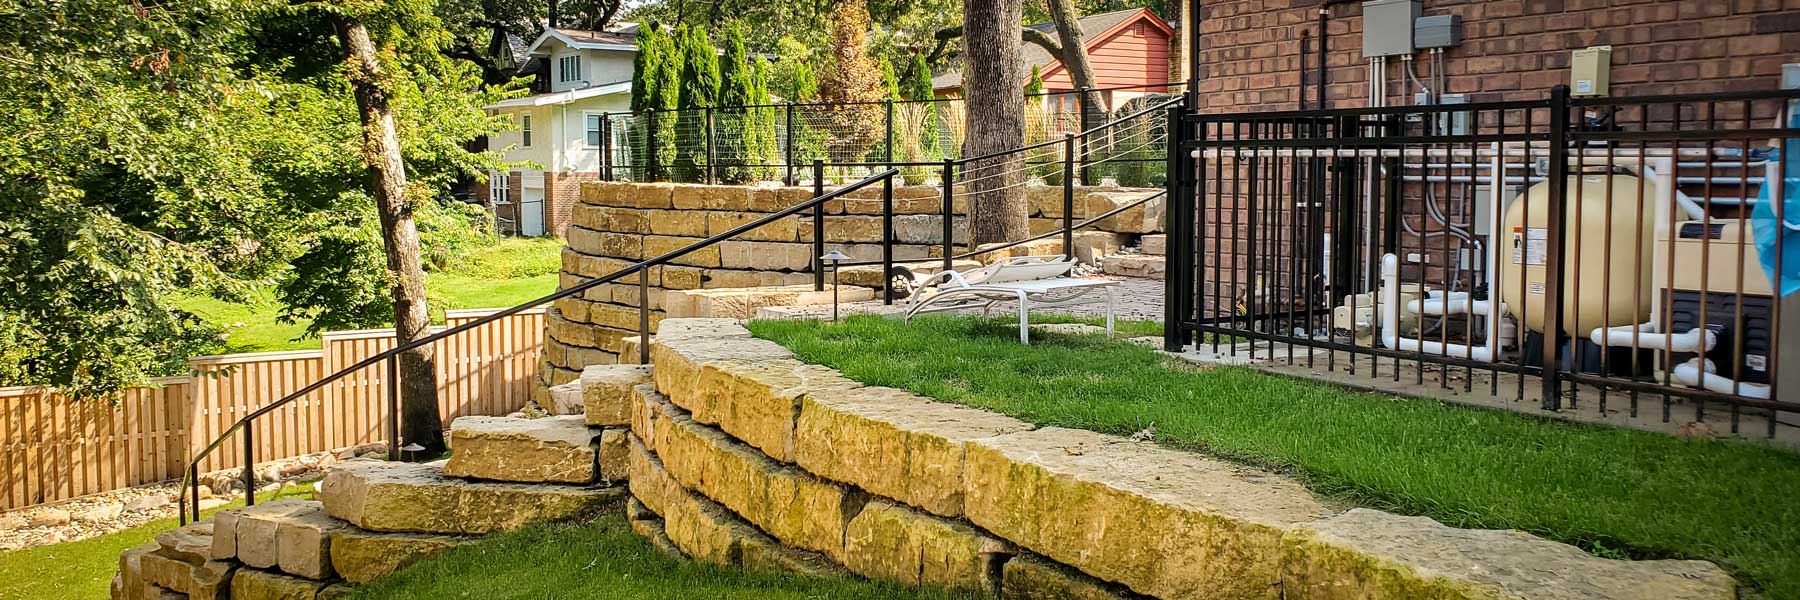 Cedar Rapids fence company residential fencing contractors Iowa railings stair railing balcony joilet commercial architectural industrial